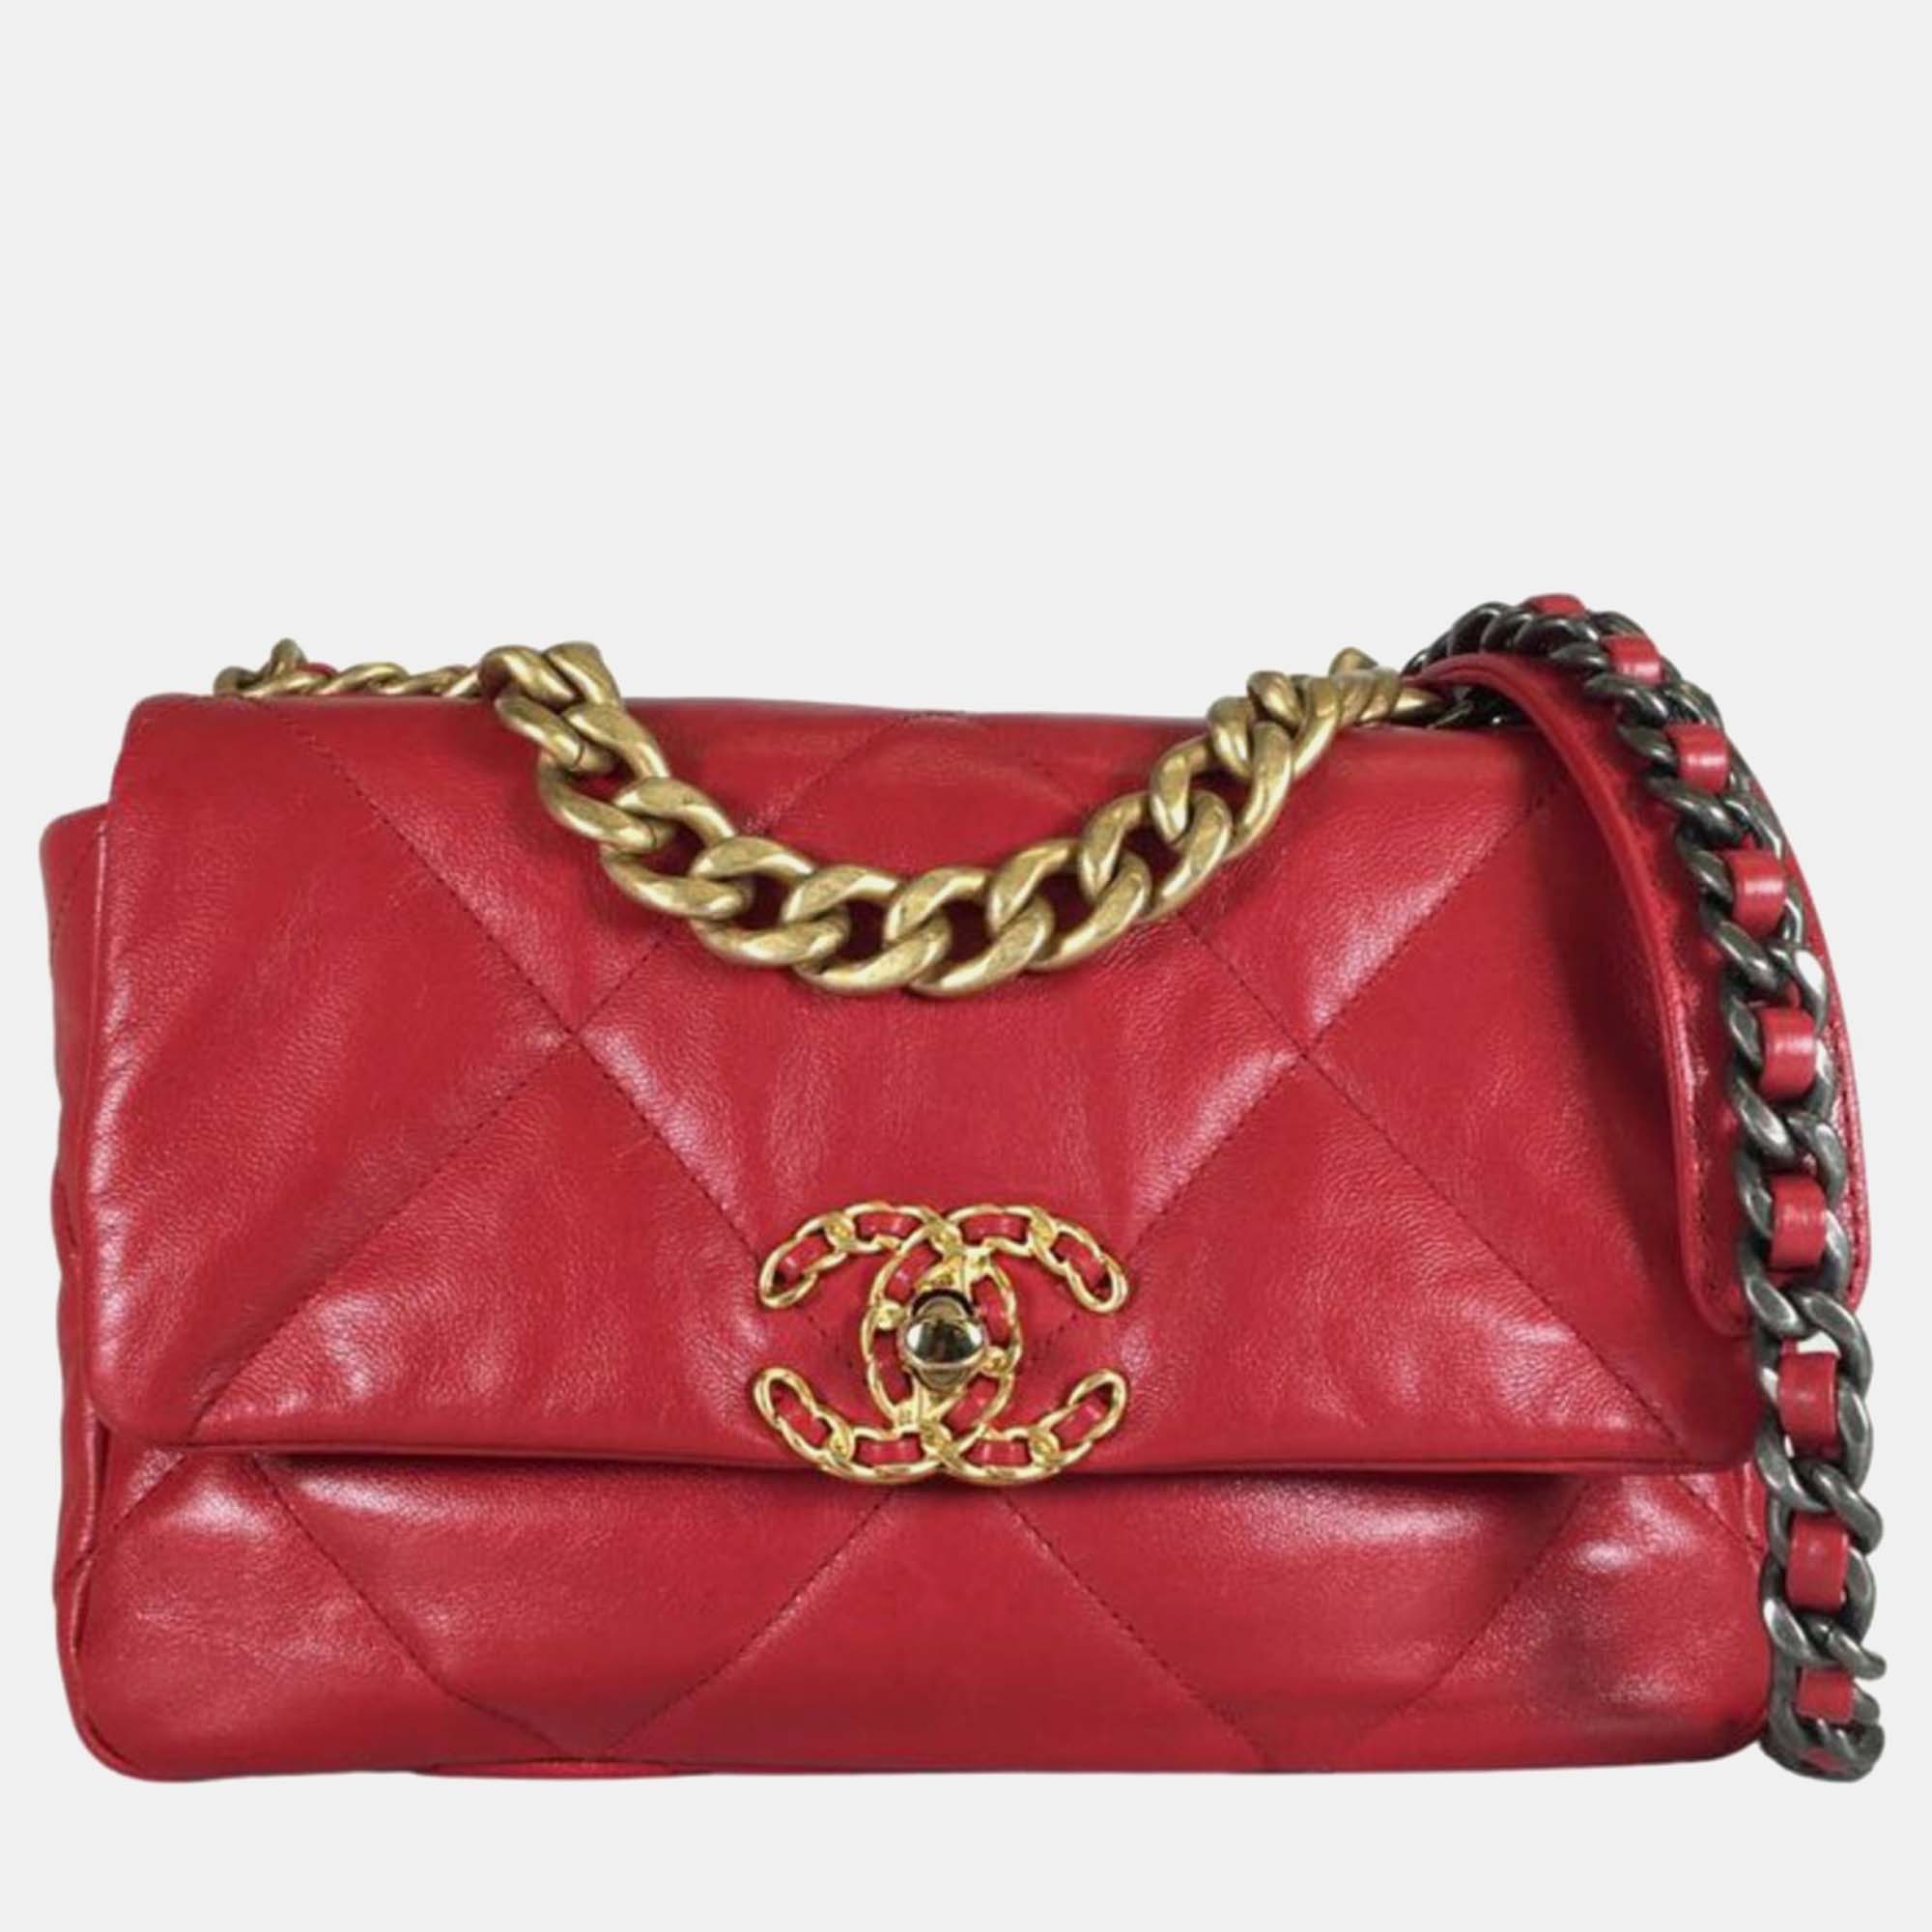 Chanel red leather small 19 shoulder bags